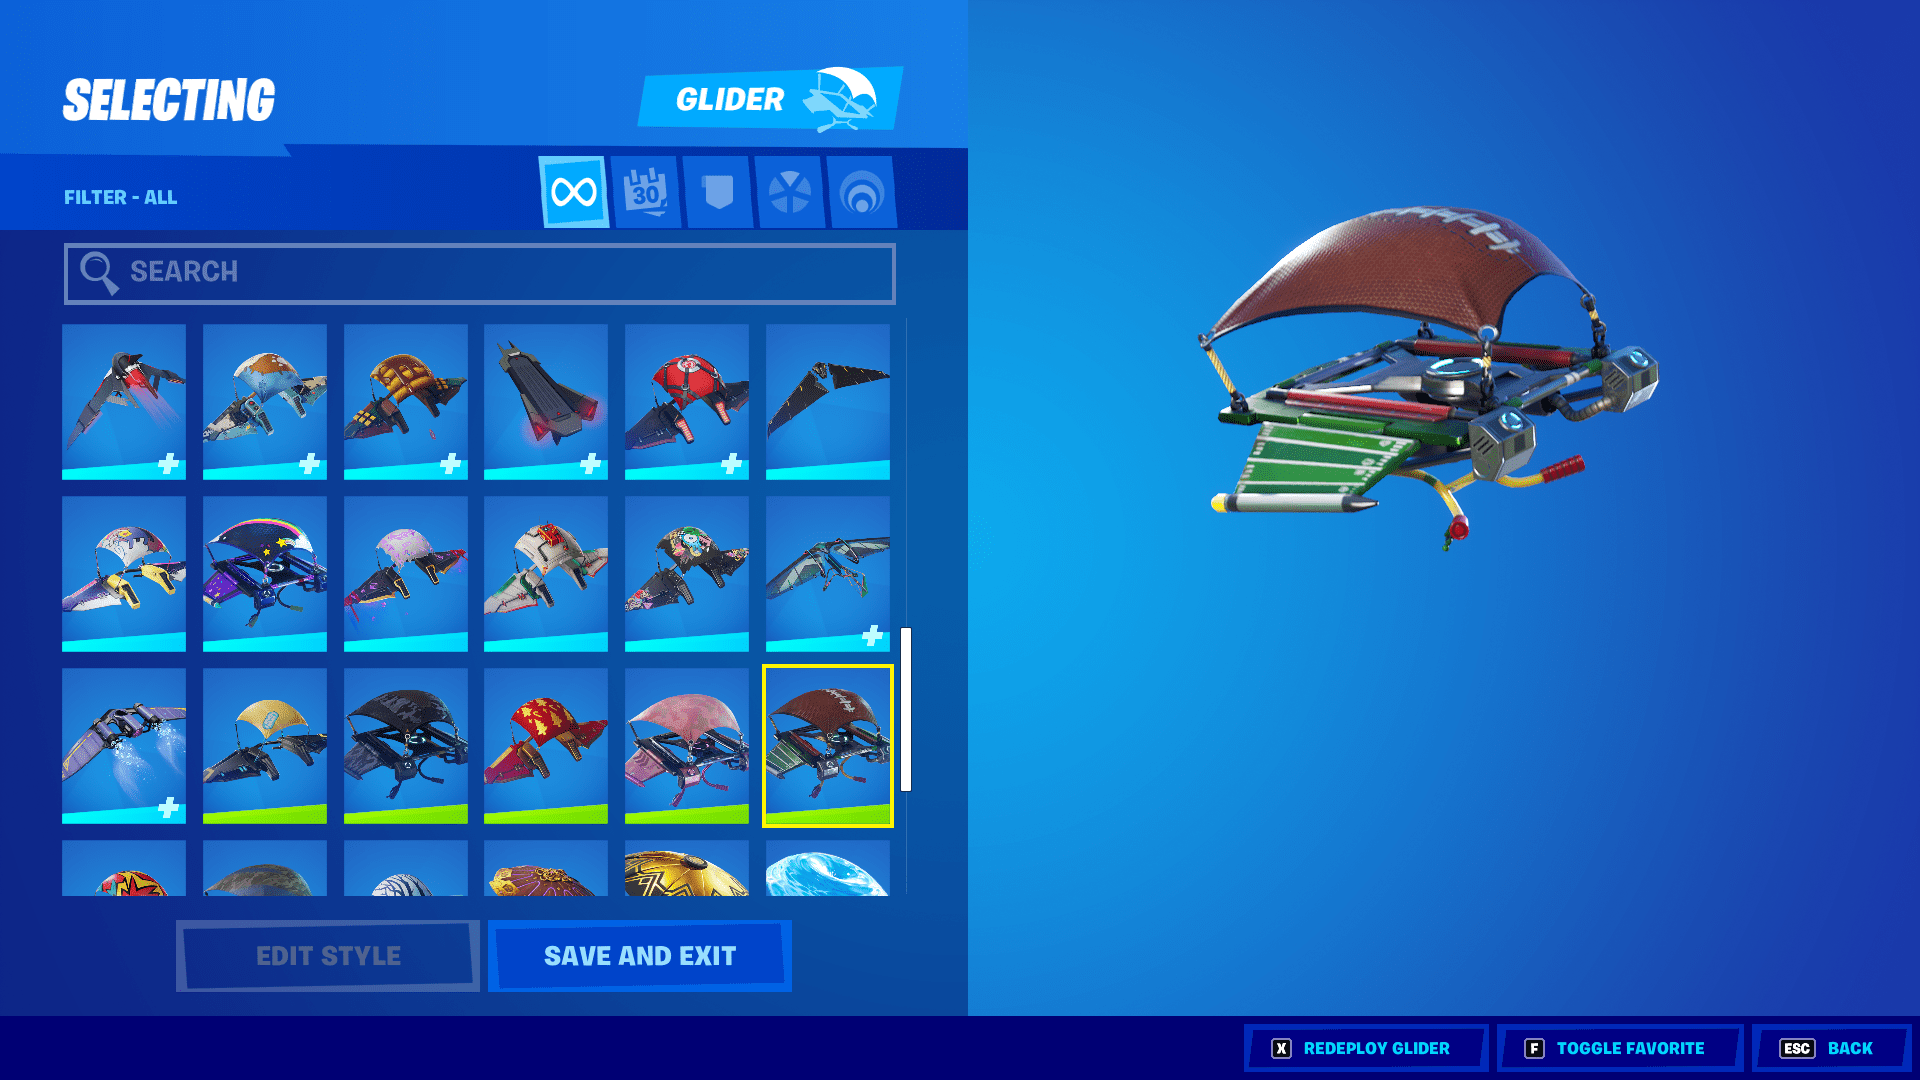 How to unlock Glider in Fortnite